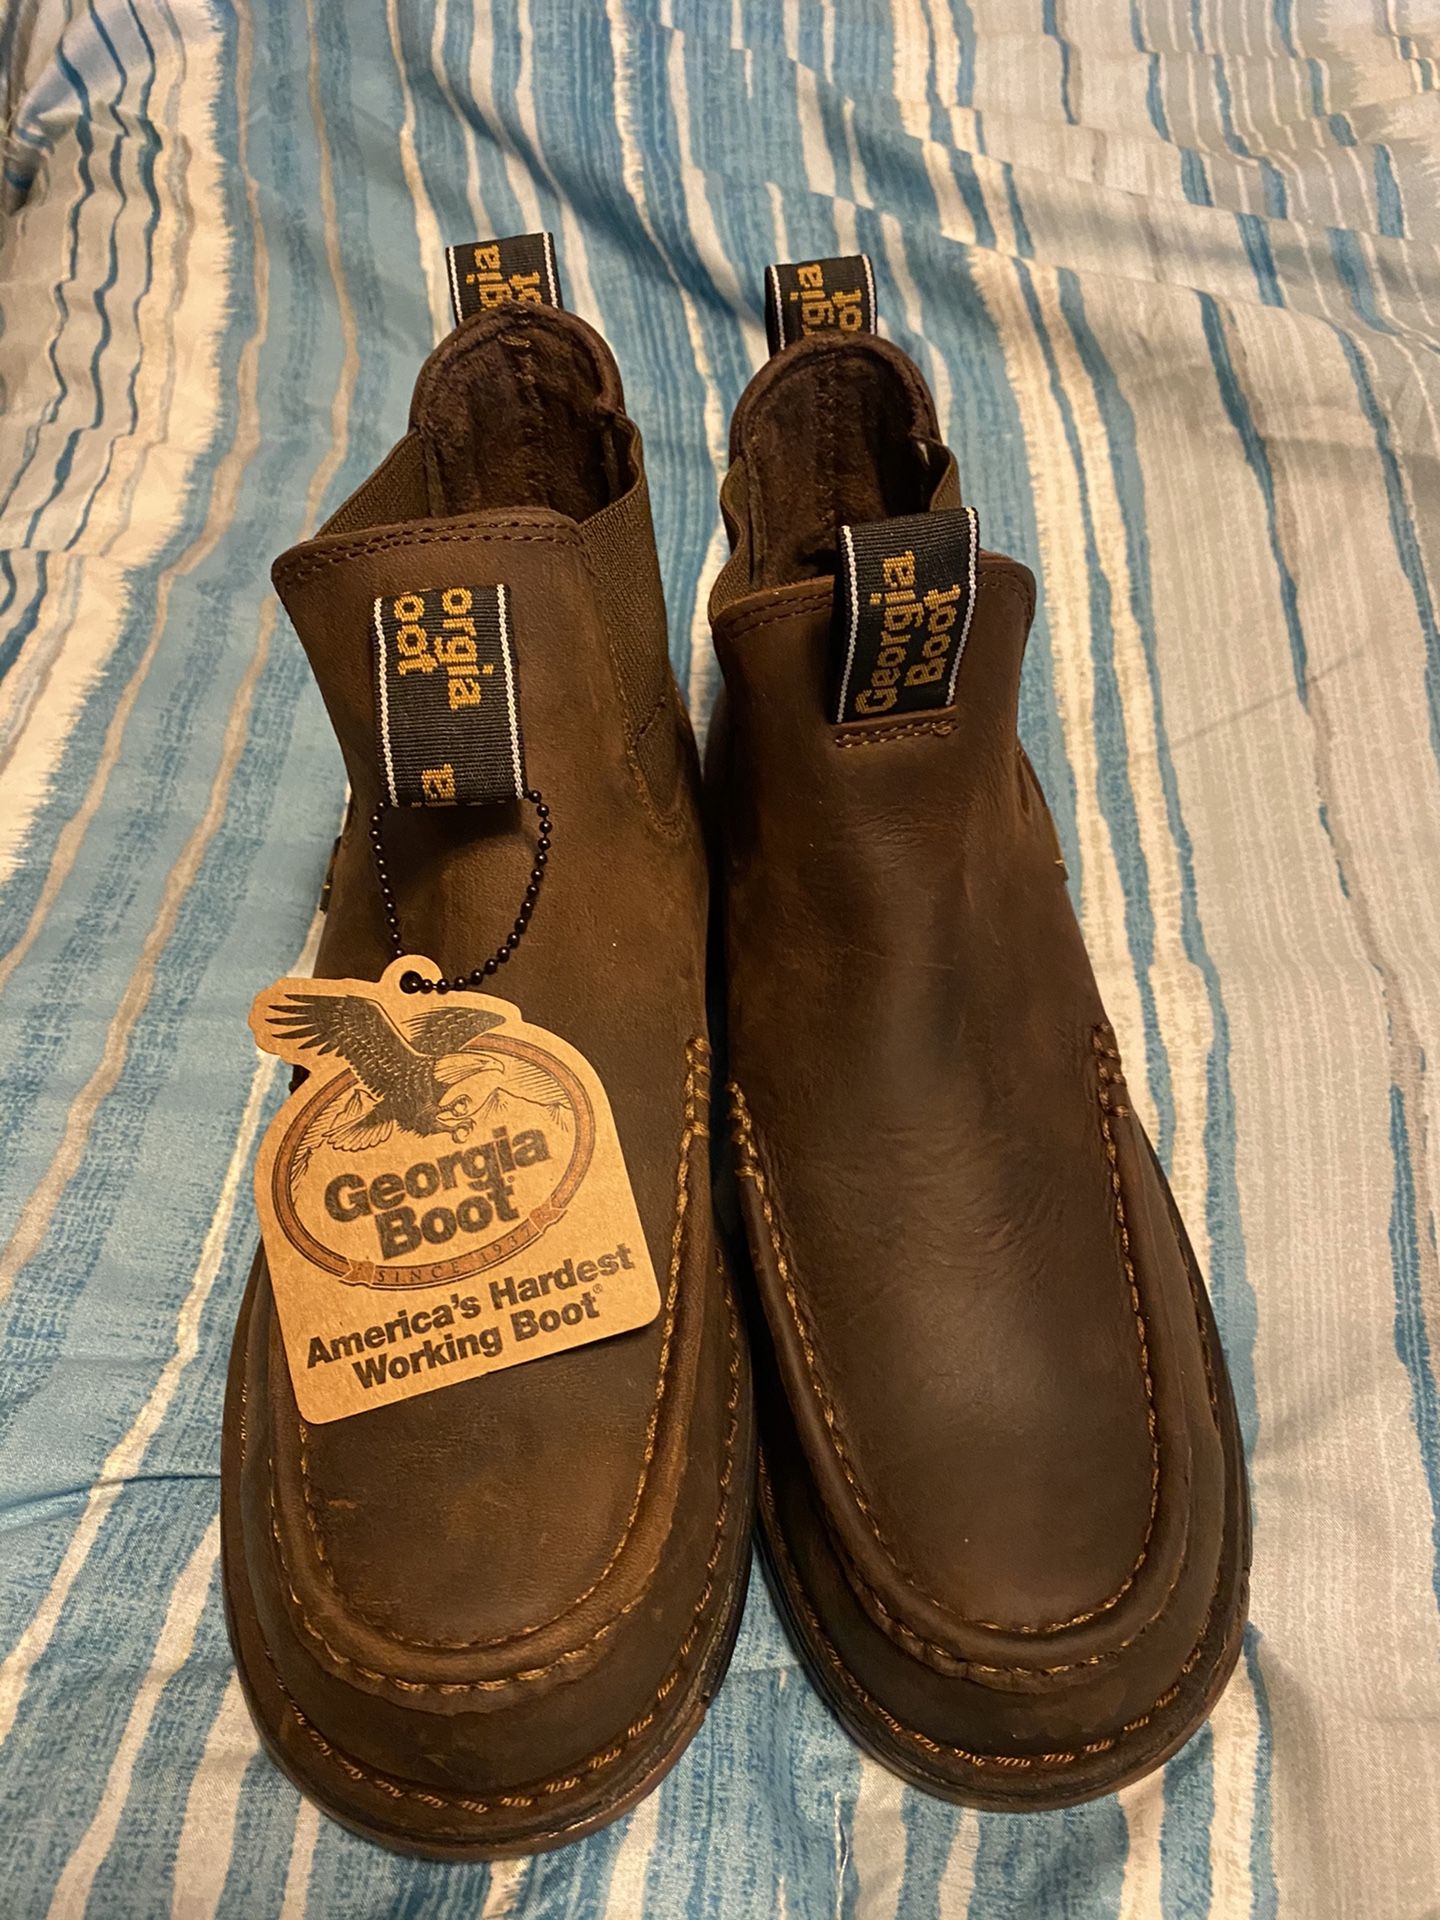 Georgia Boots New (Price reduced $50)